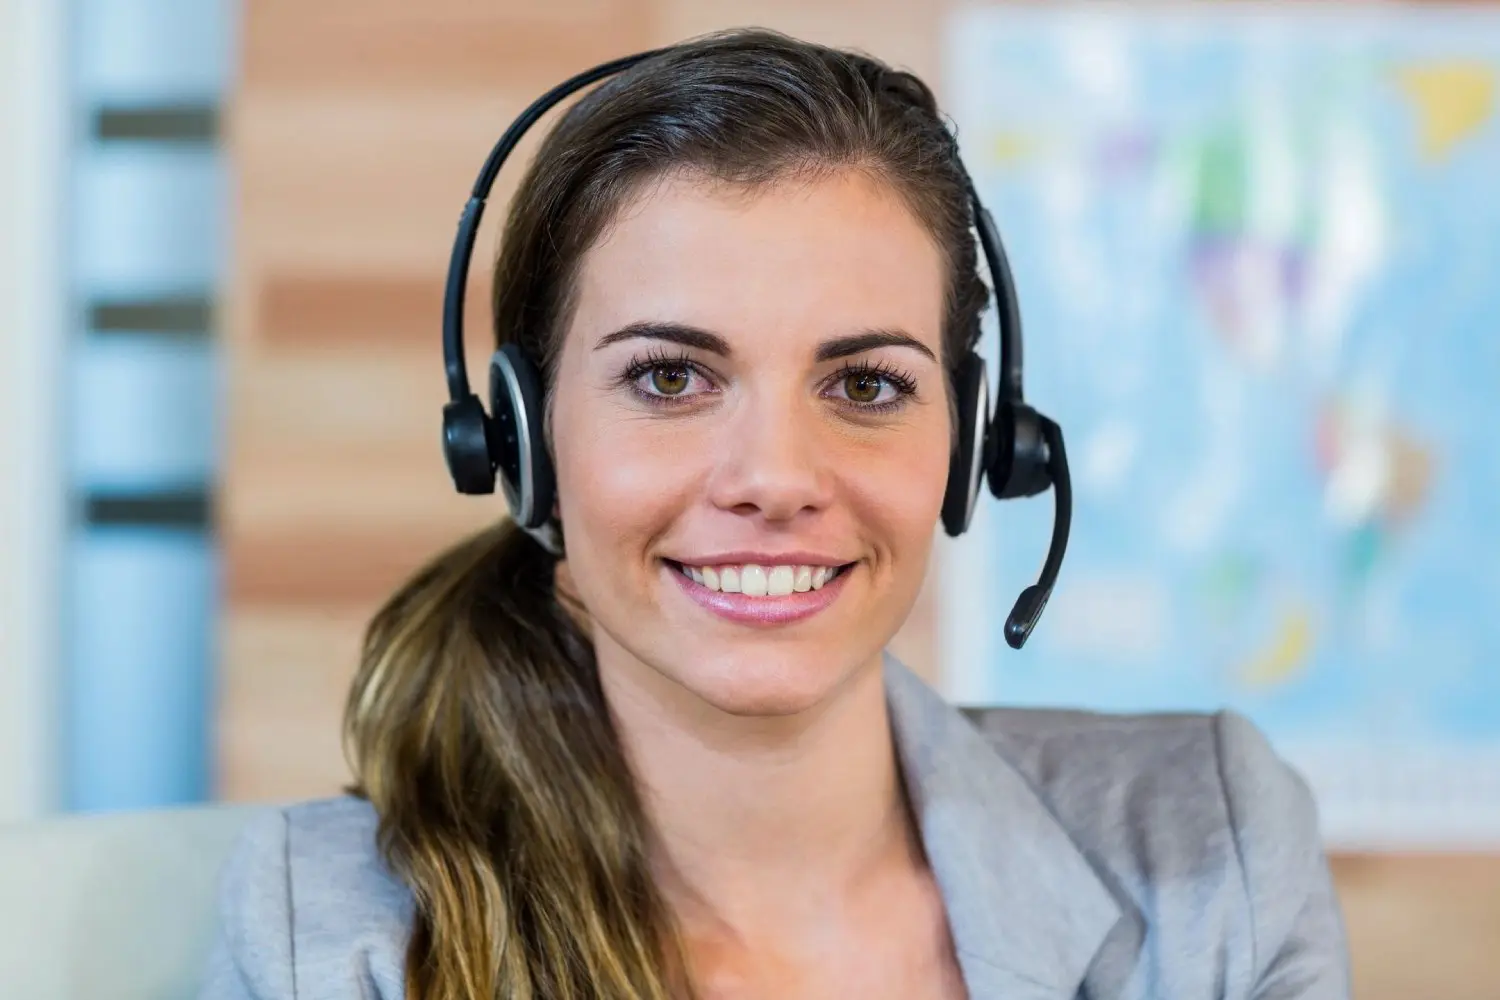 A woman wearing headphones and smiling for the camera.